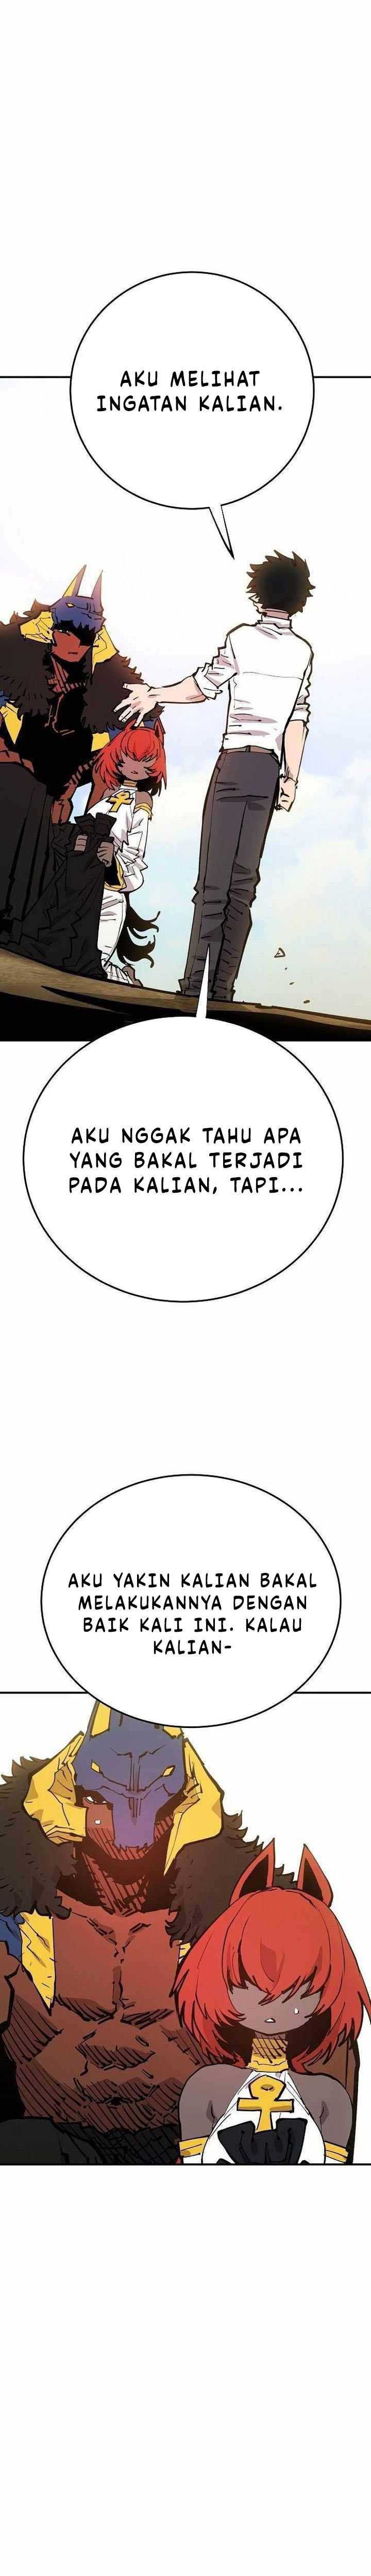 Player Chapter 118